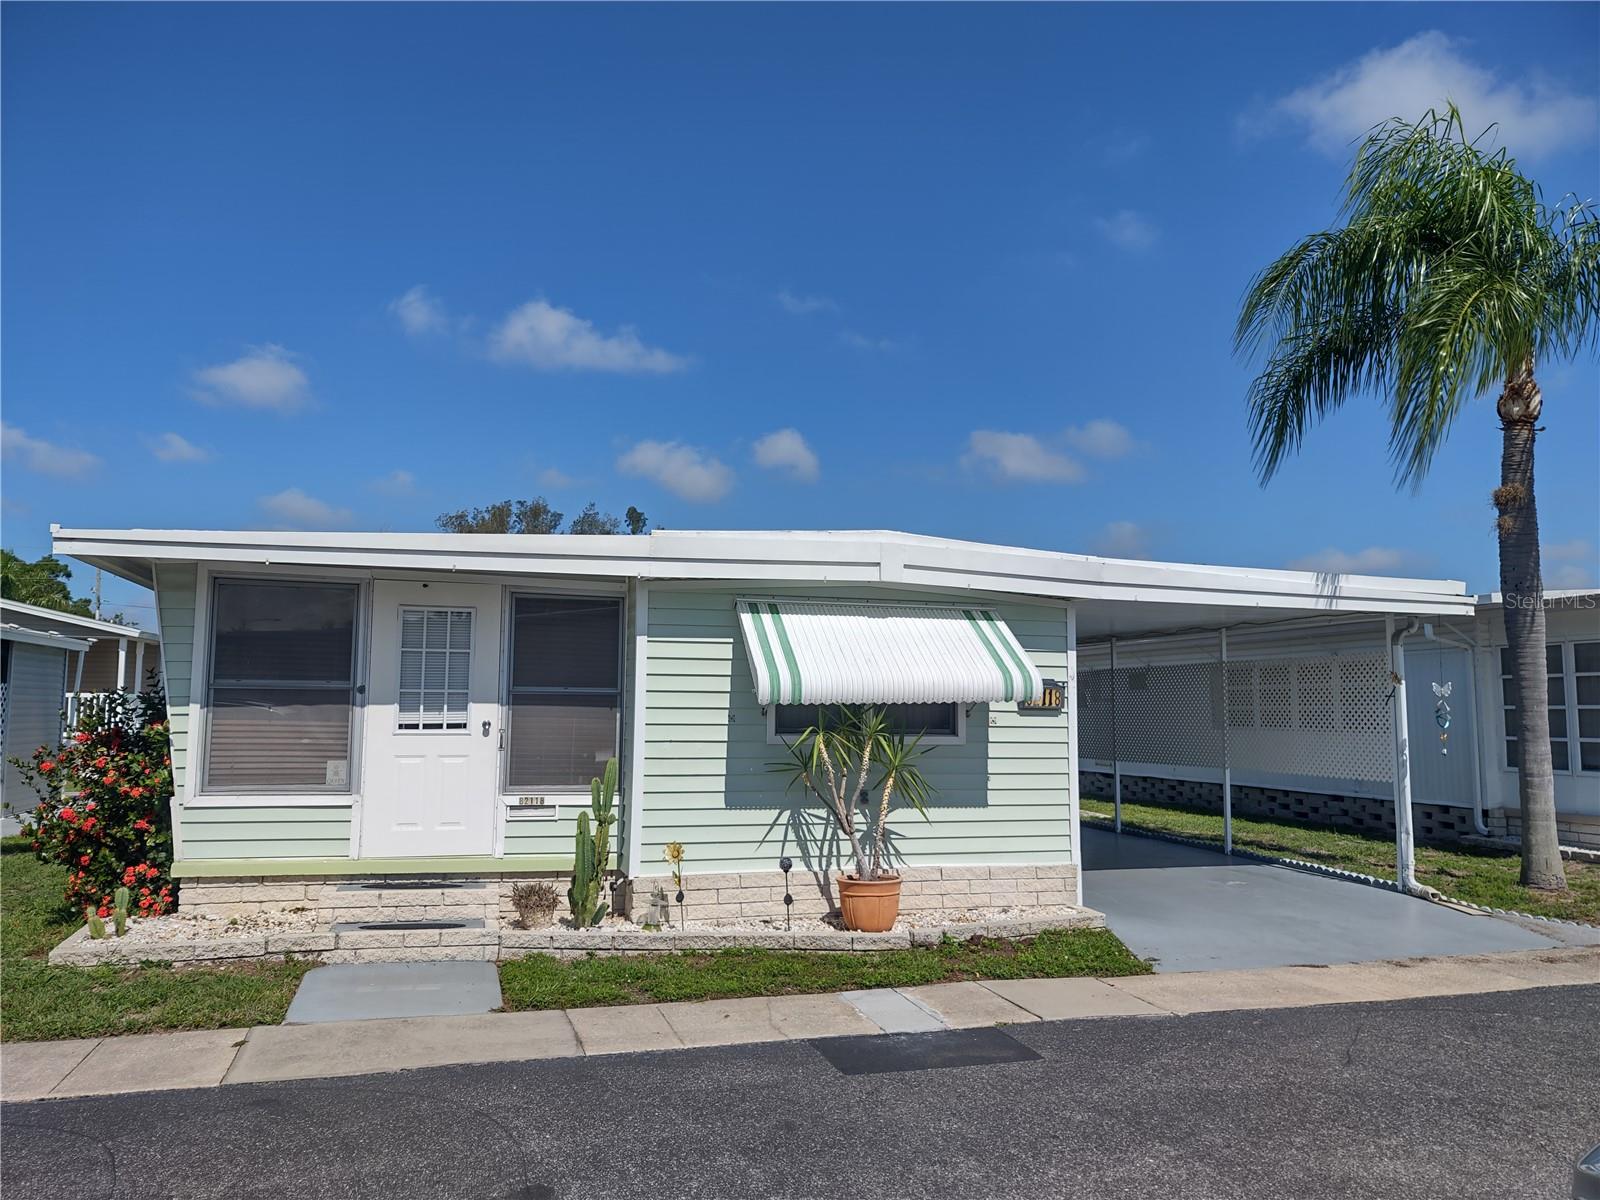 Great budget friendly home located in Tampa Bay's +55 resident owned cooperative, Golden Gate Mobile Home Park.